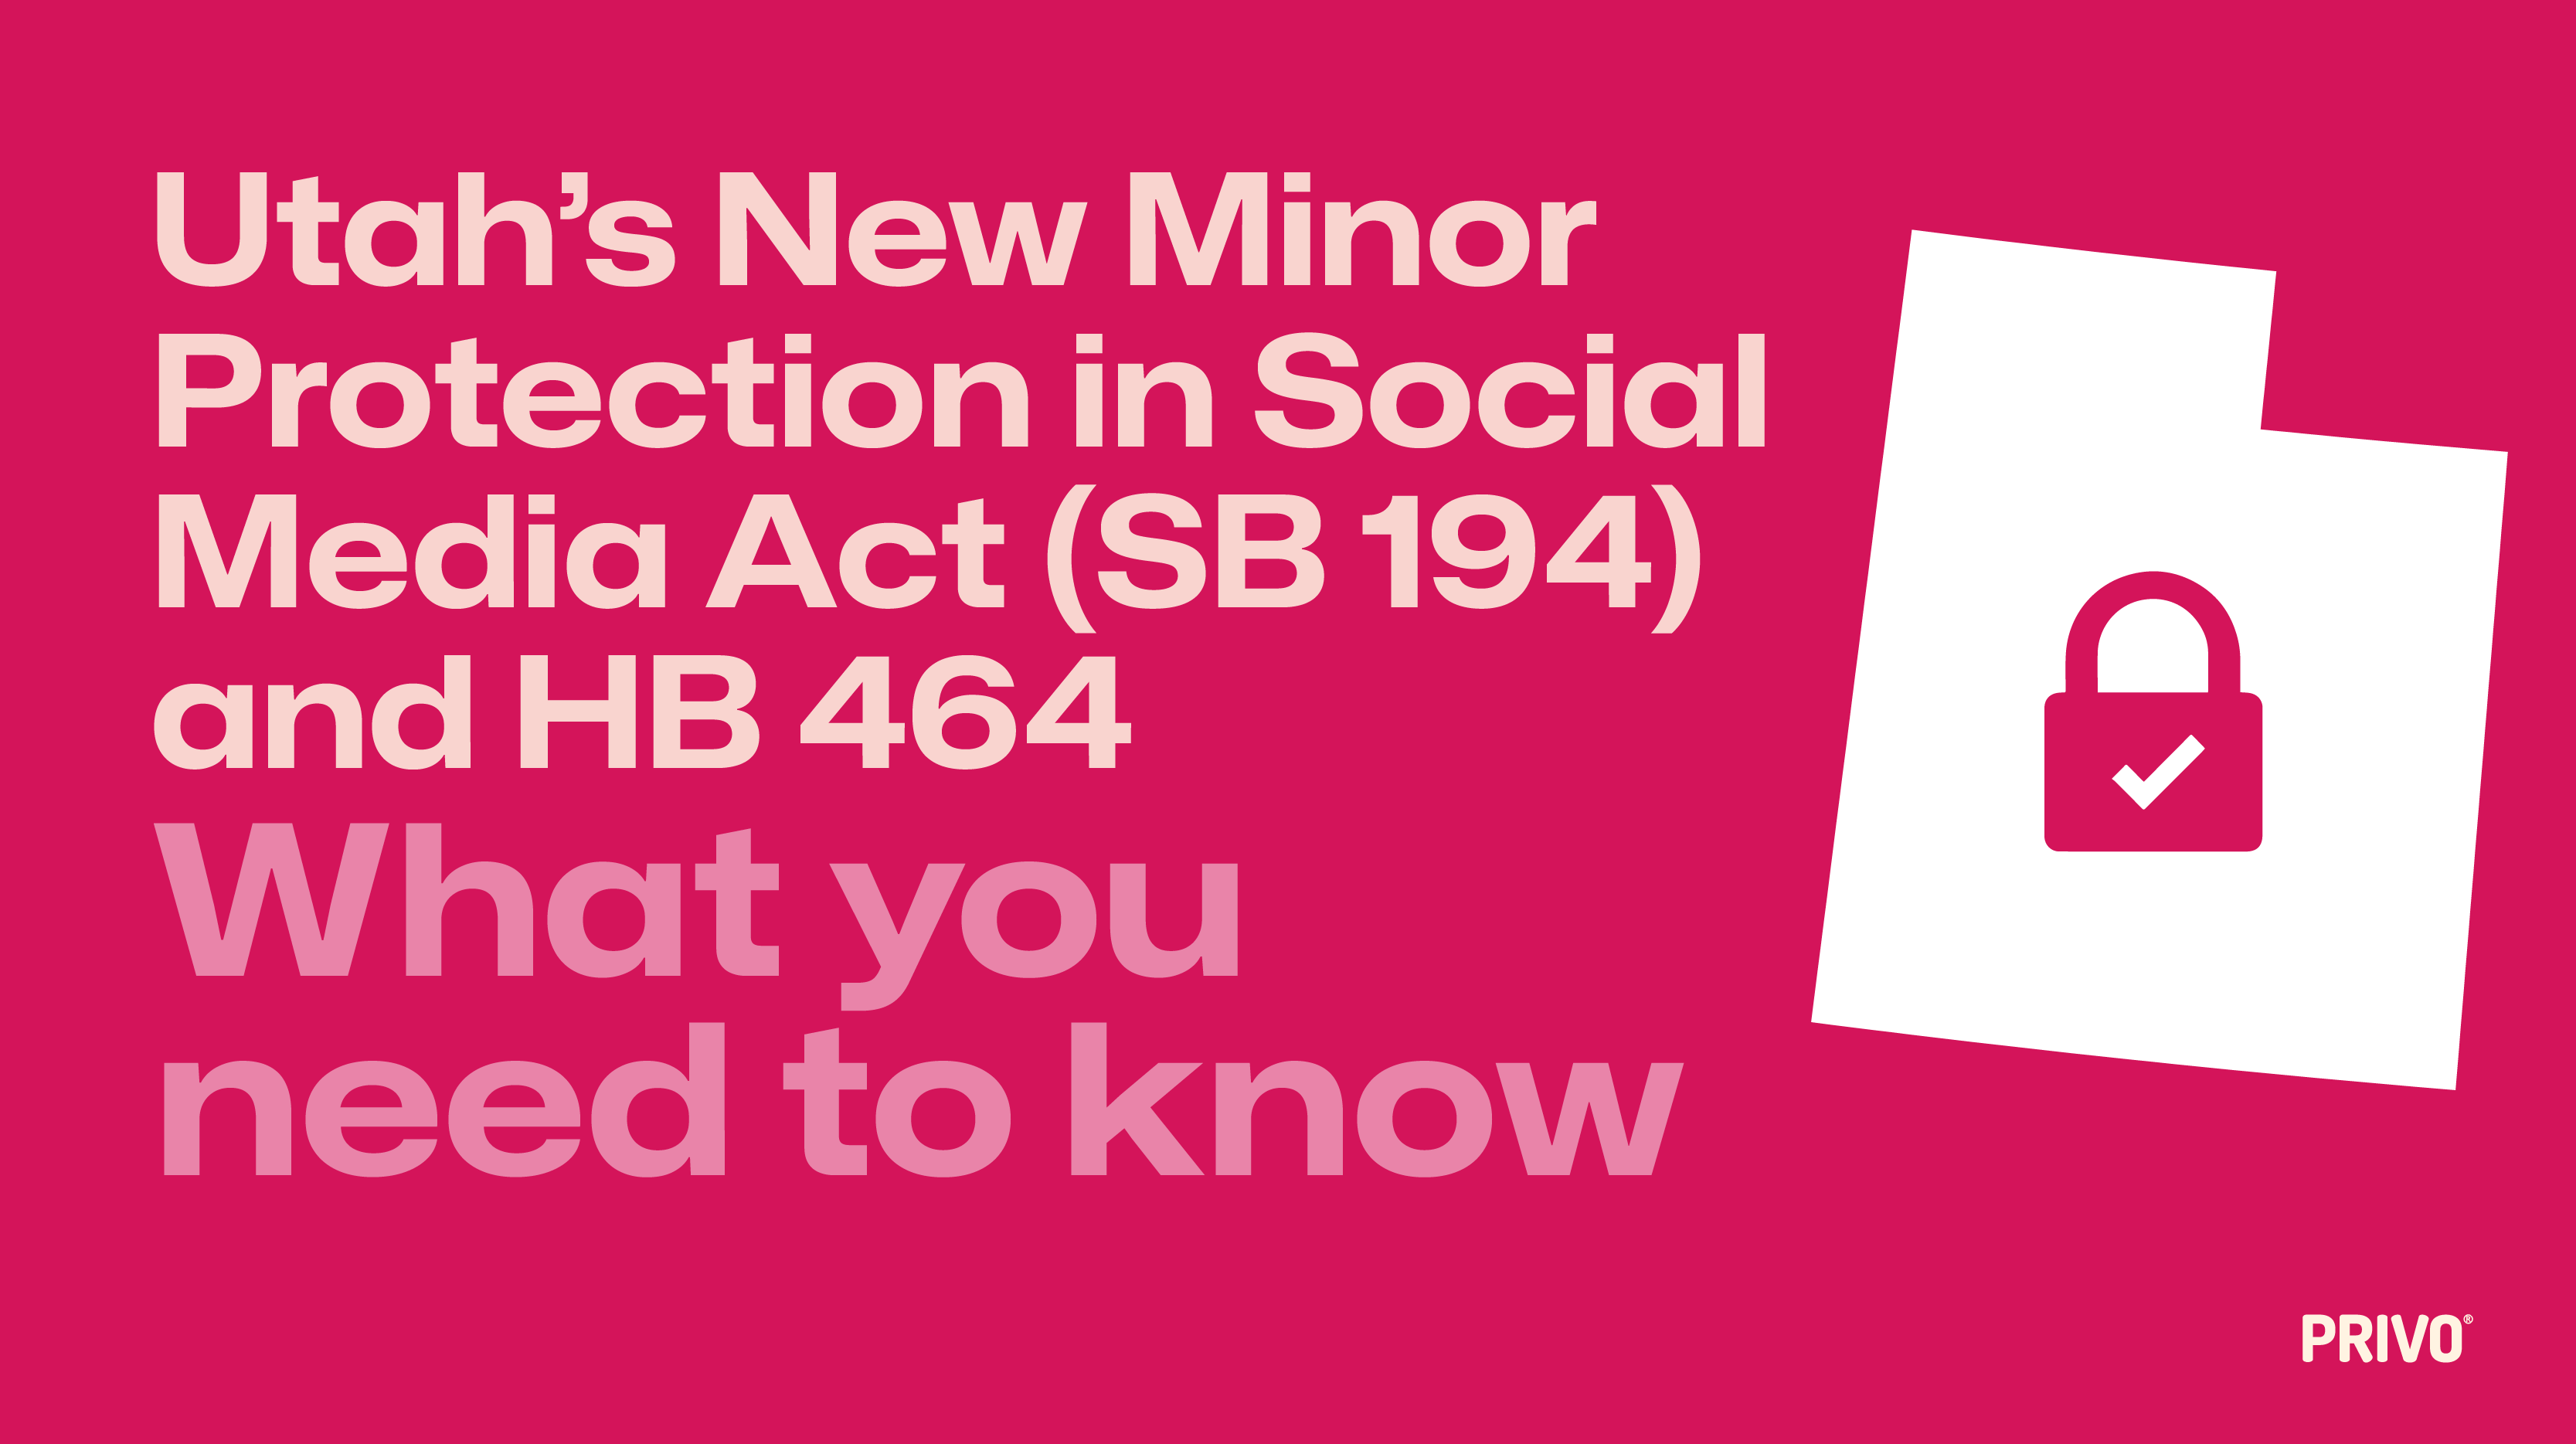 Blog Title: Utah's New Minors Utah's new Minor Protection in Social Media Act (SB 194) and HB 464. What you need to know. 